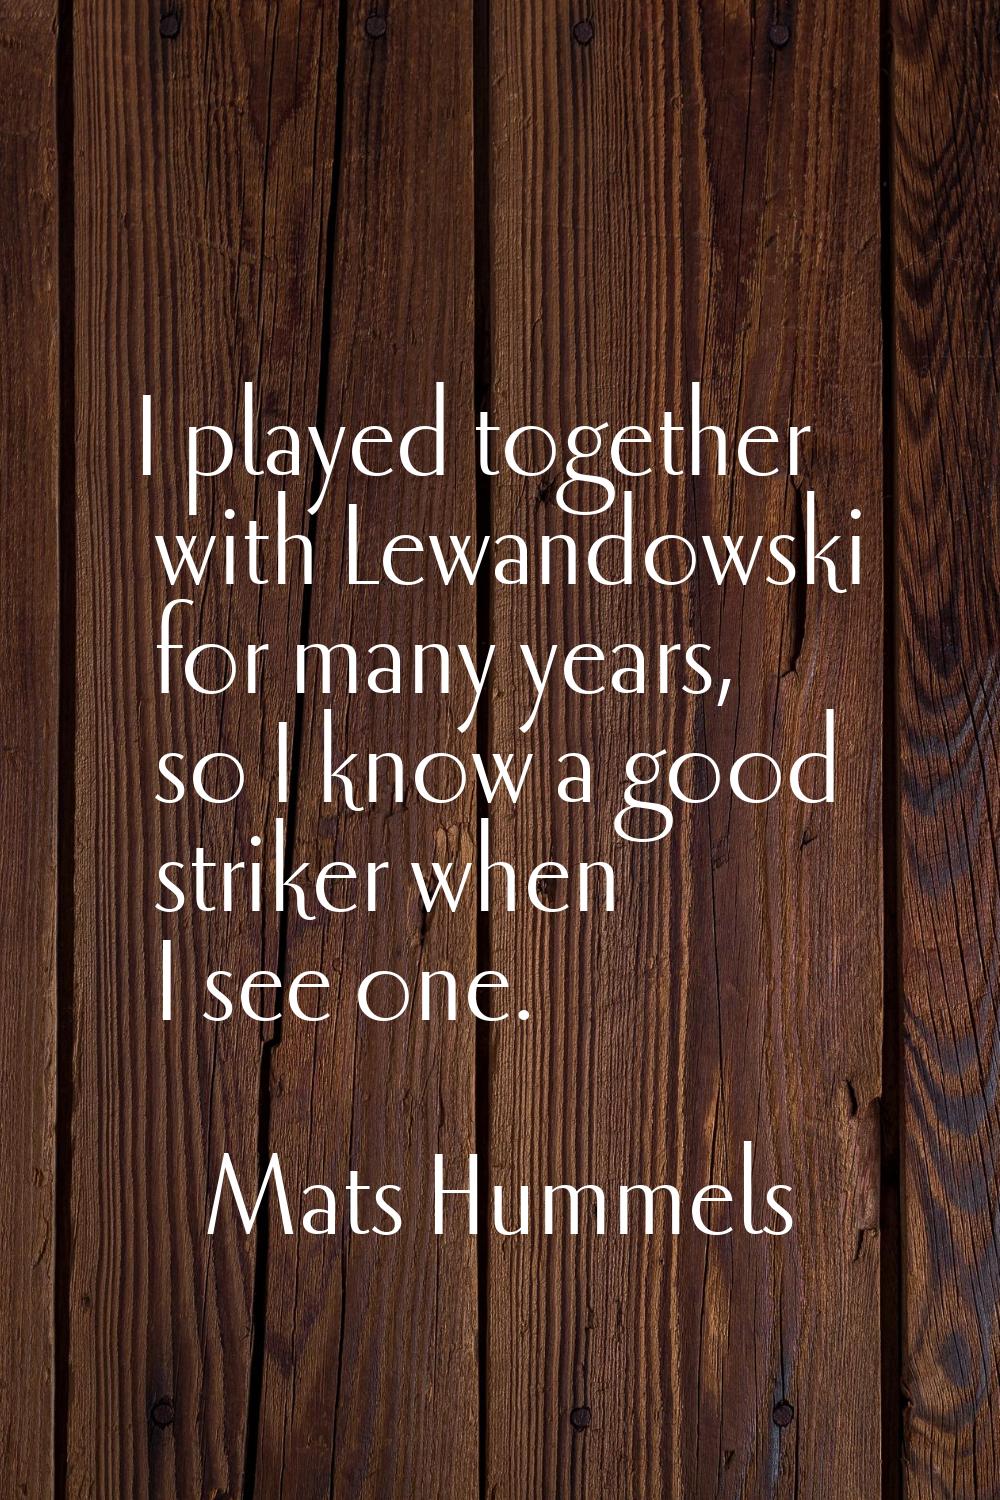 I played together with Lewandowski for many years, so I know a good striker when I see one.